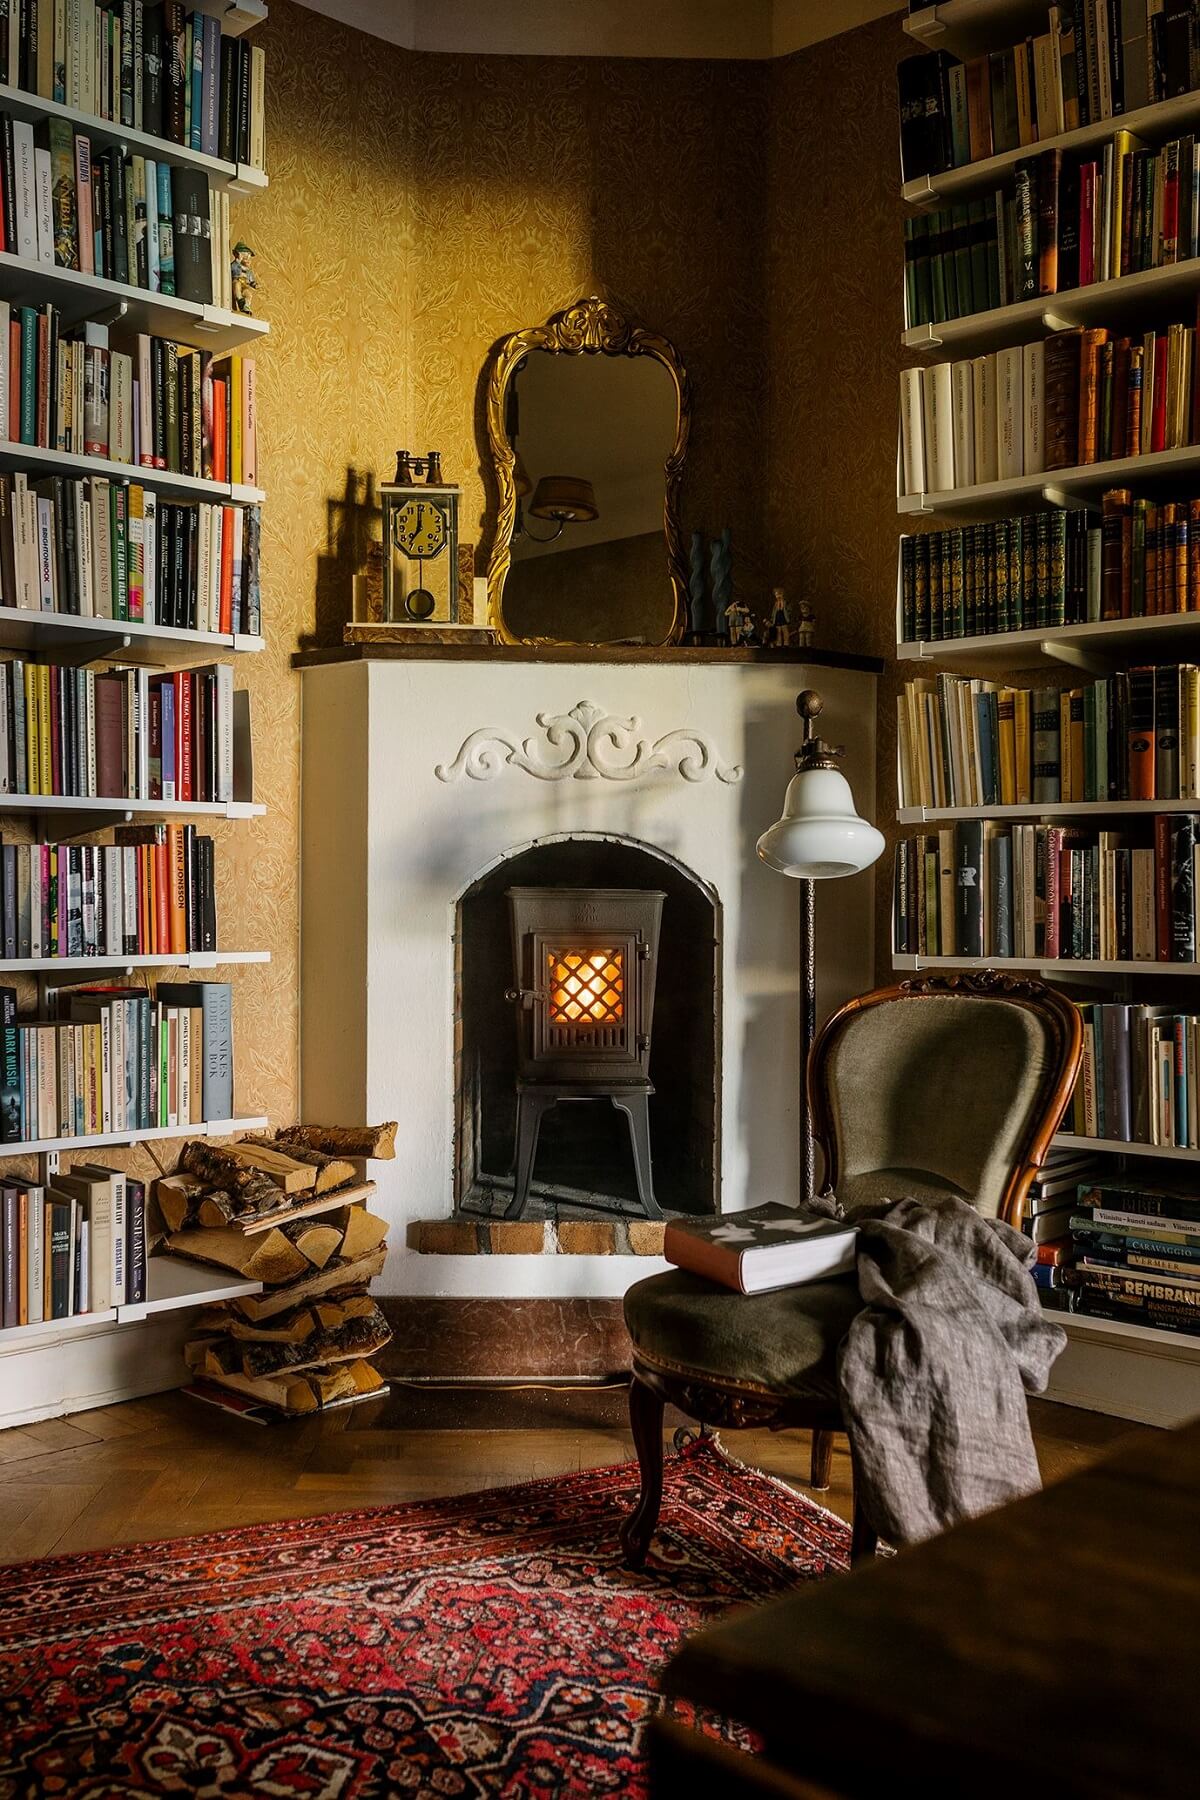 A Vintage Home with a Cozy Reading Room